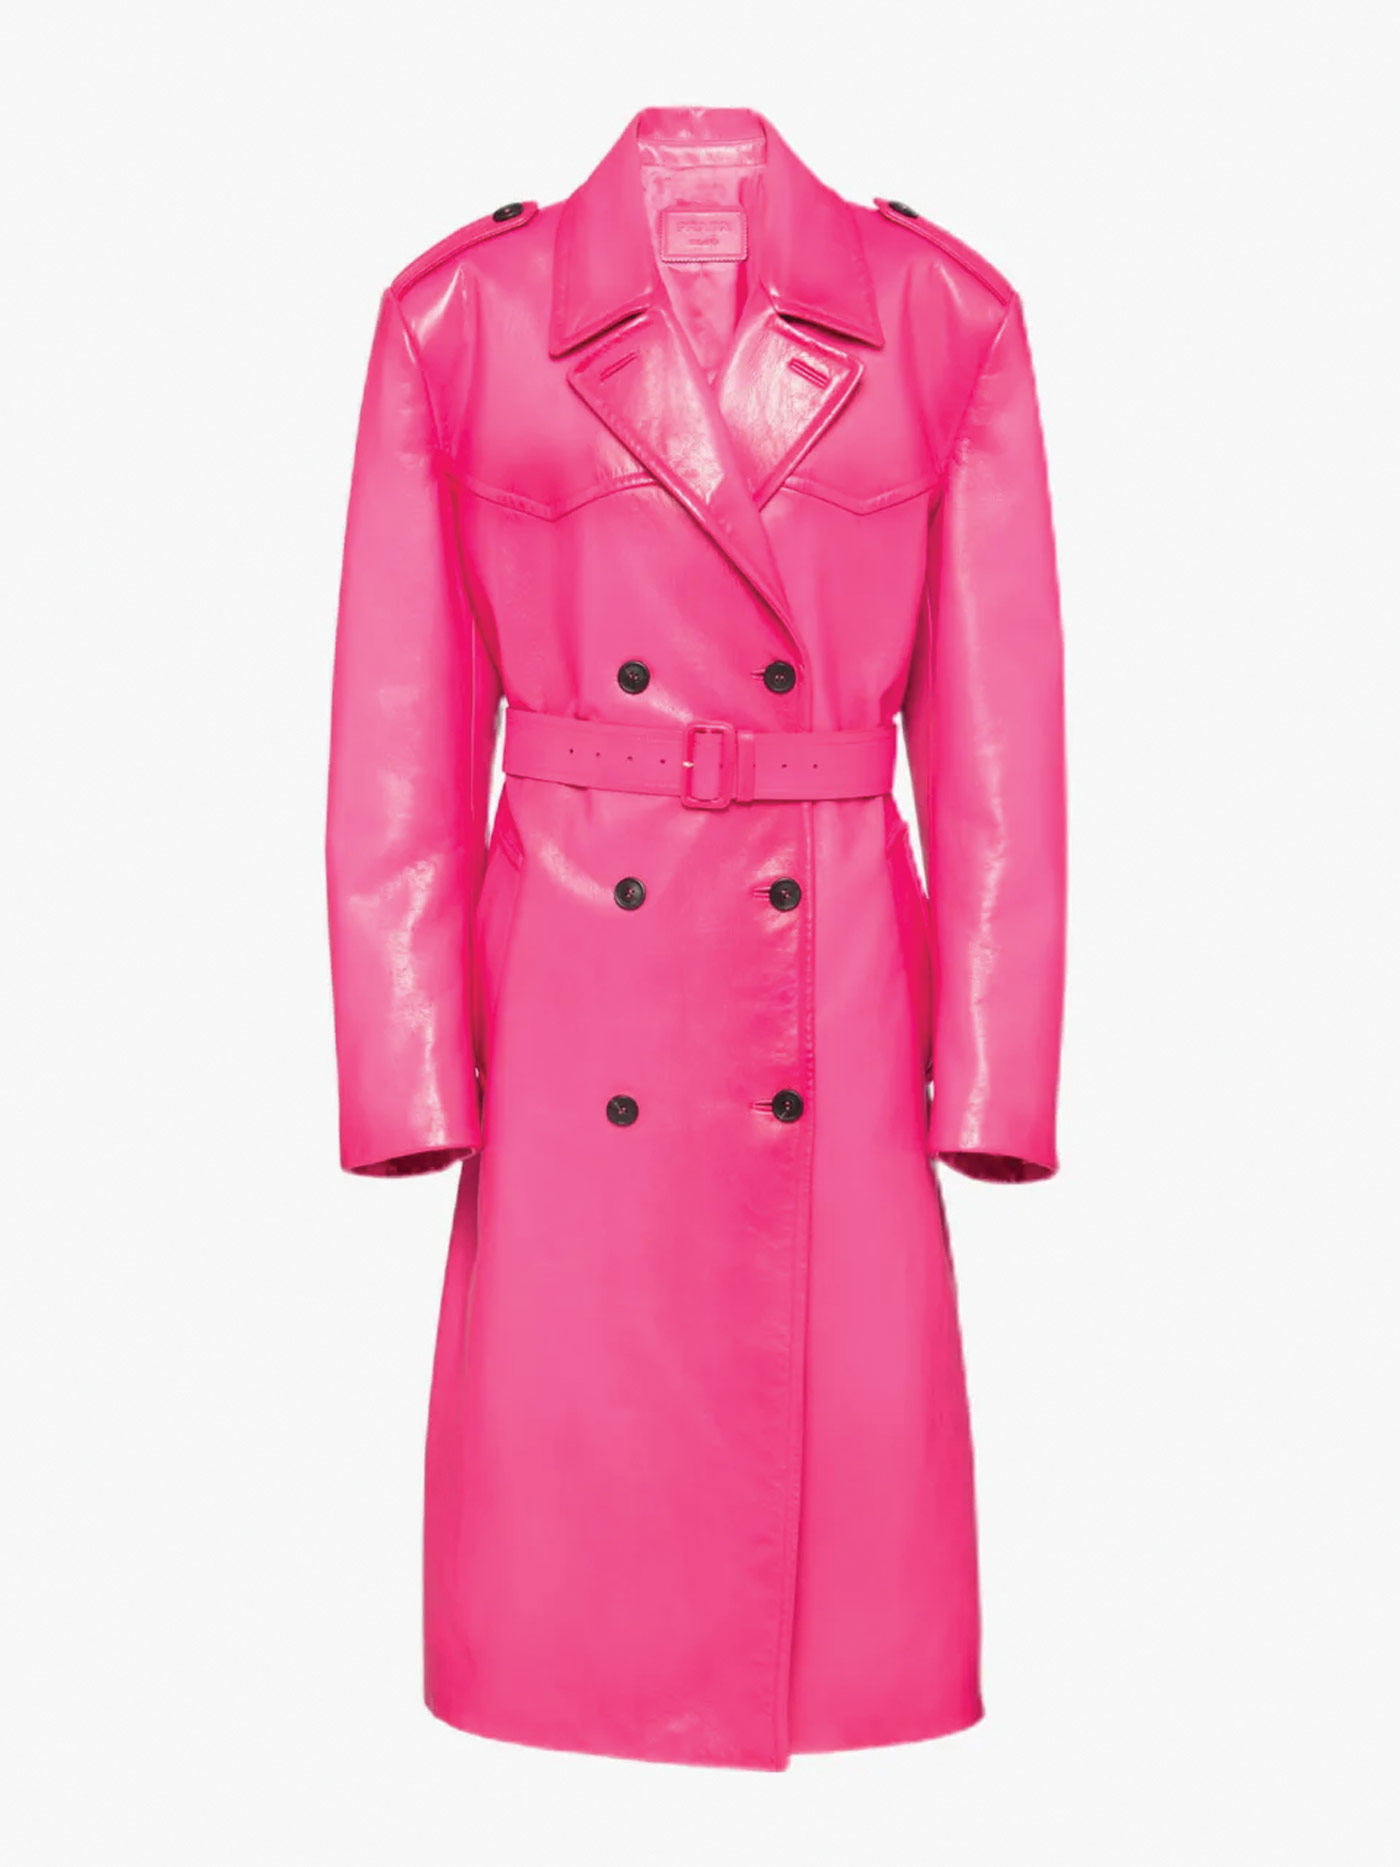 Double Breasted Leather Trench Coat $ 11,100 Prada.com